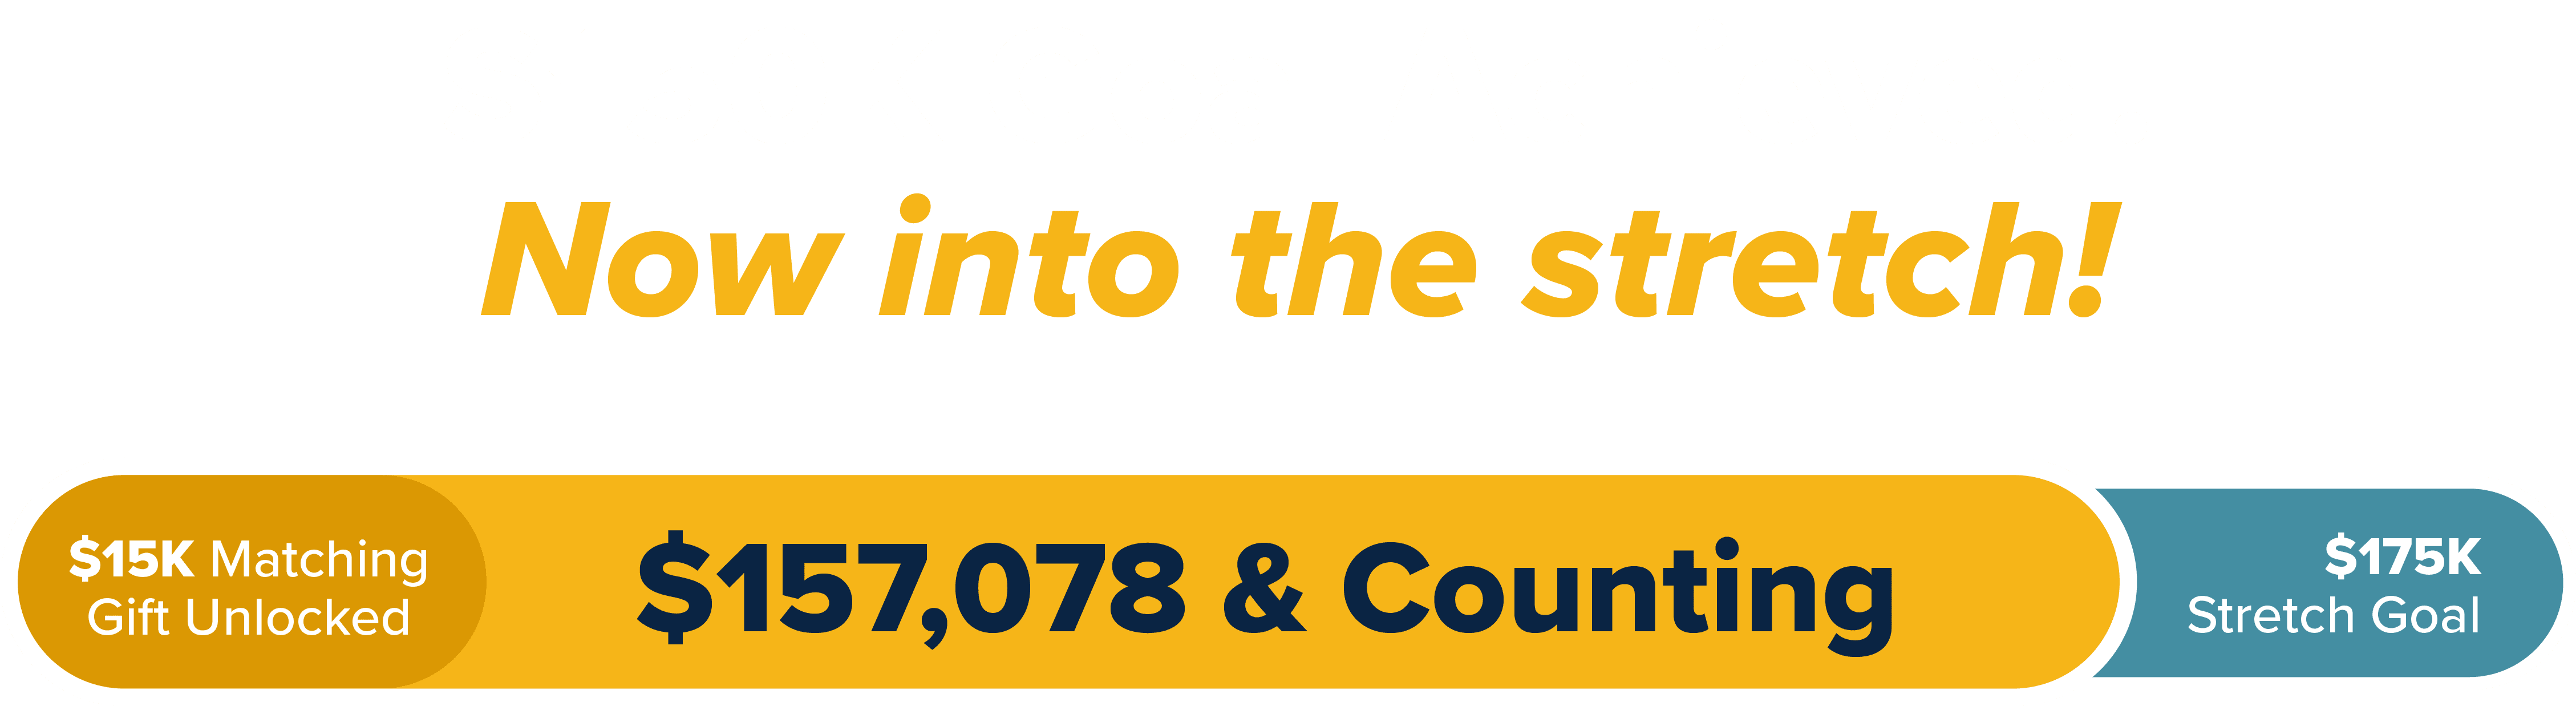 2022 Give Day Goals